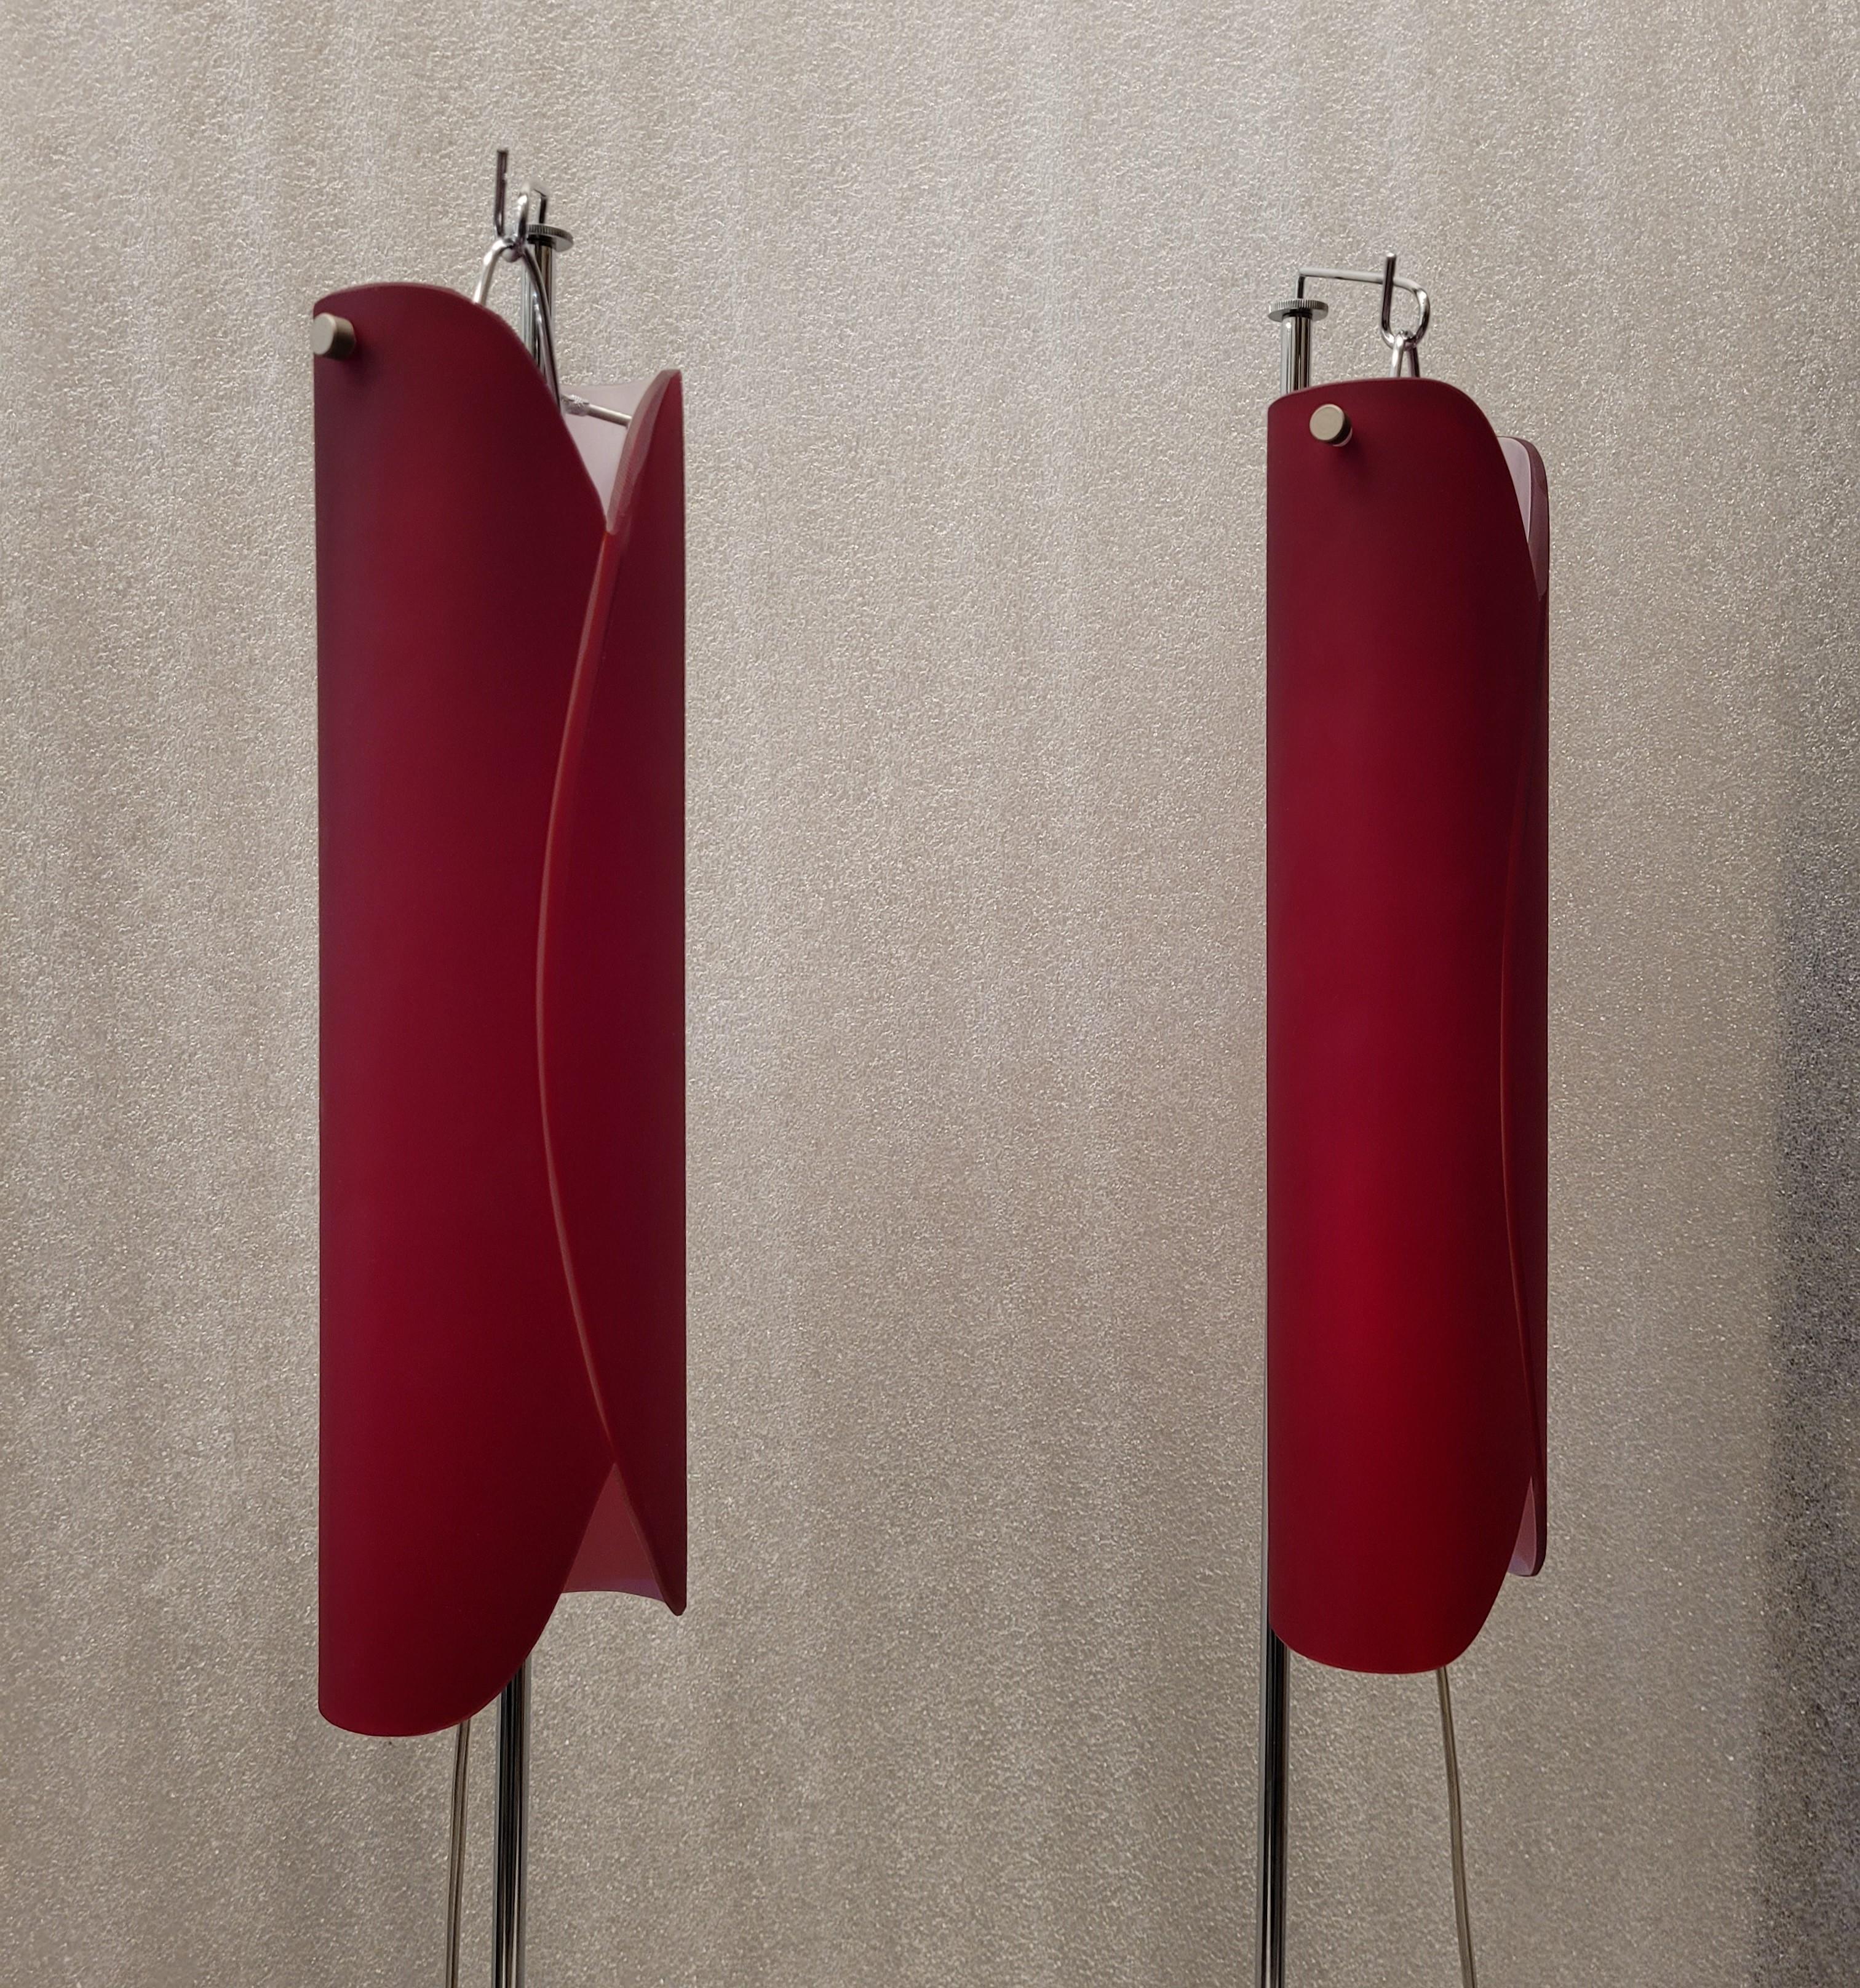 Outstanding pair of Floor lamps in steel and red Murano glass made by the Vivarini factory for Roche Bobois. Exquisite in its conception and structure, the screen is made of curved glass, red on the outside and white on the inside, in the shape of a